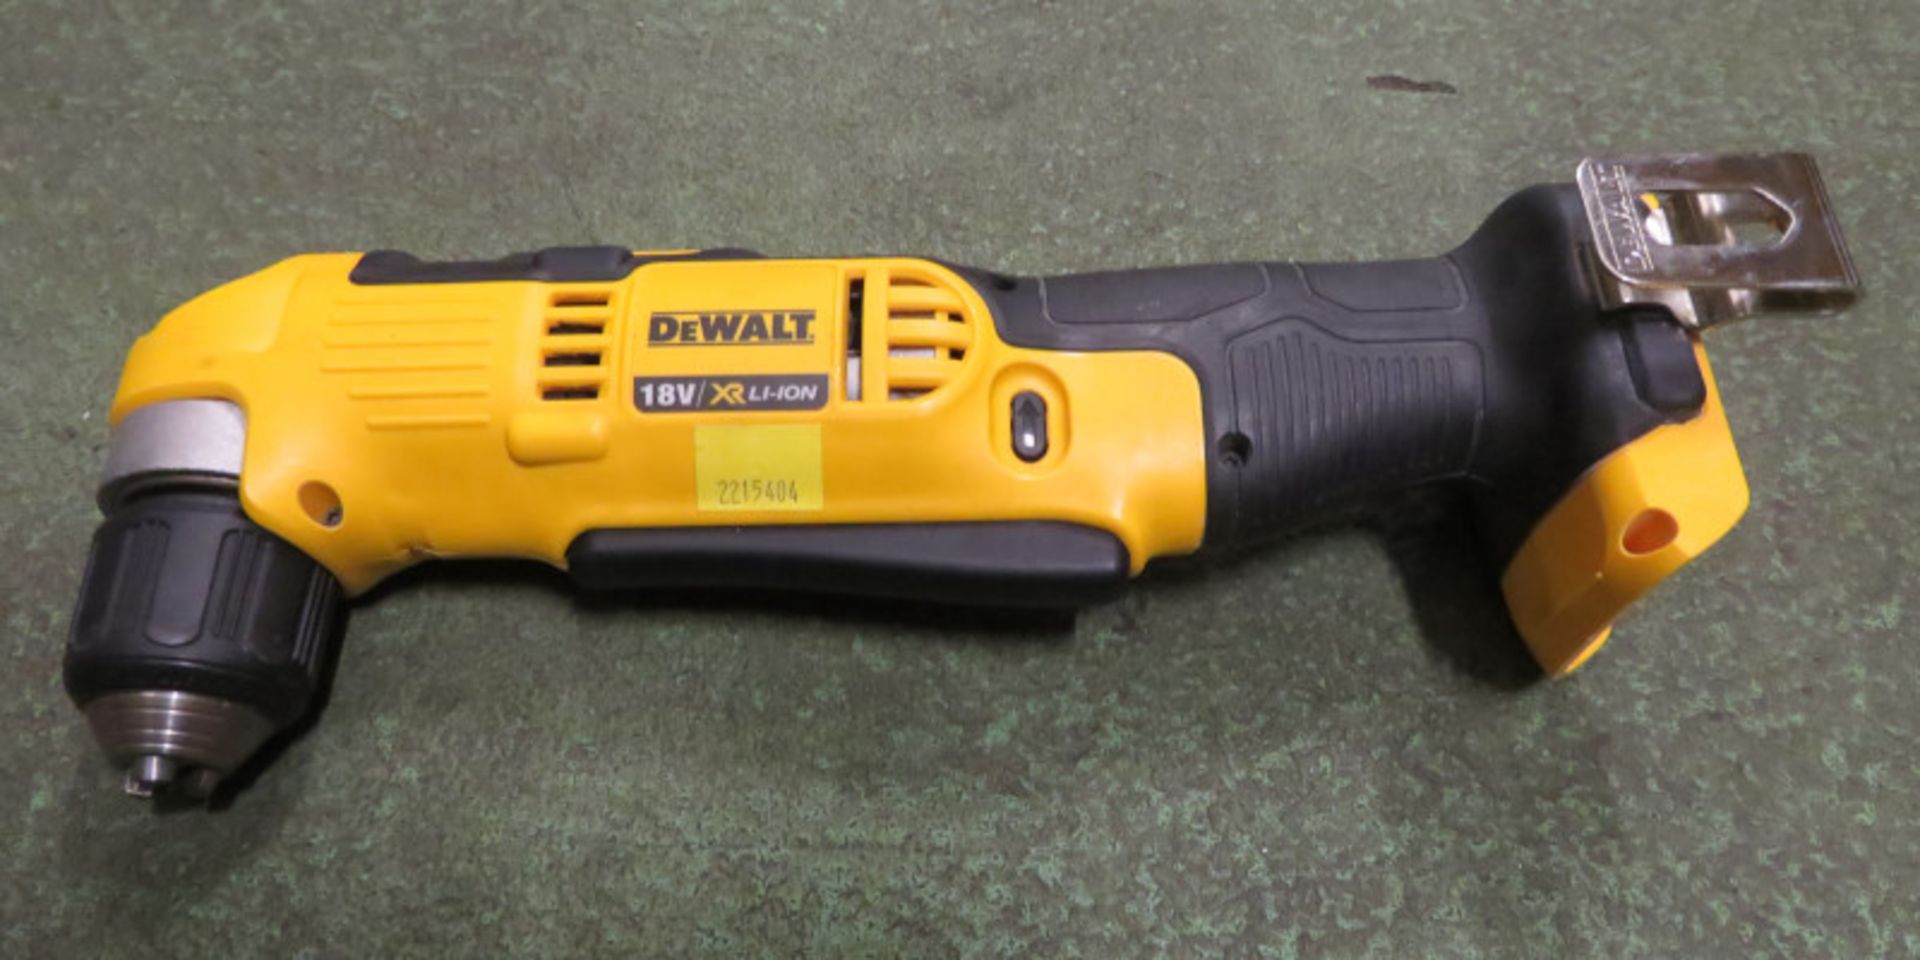 Dewalt DCD740 right angle drill, 18V / XR Li-Ion with charger, 1 battery - Image 2 of 4